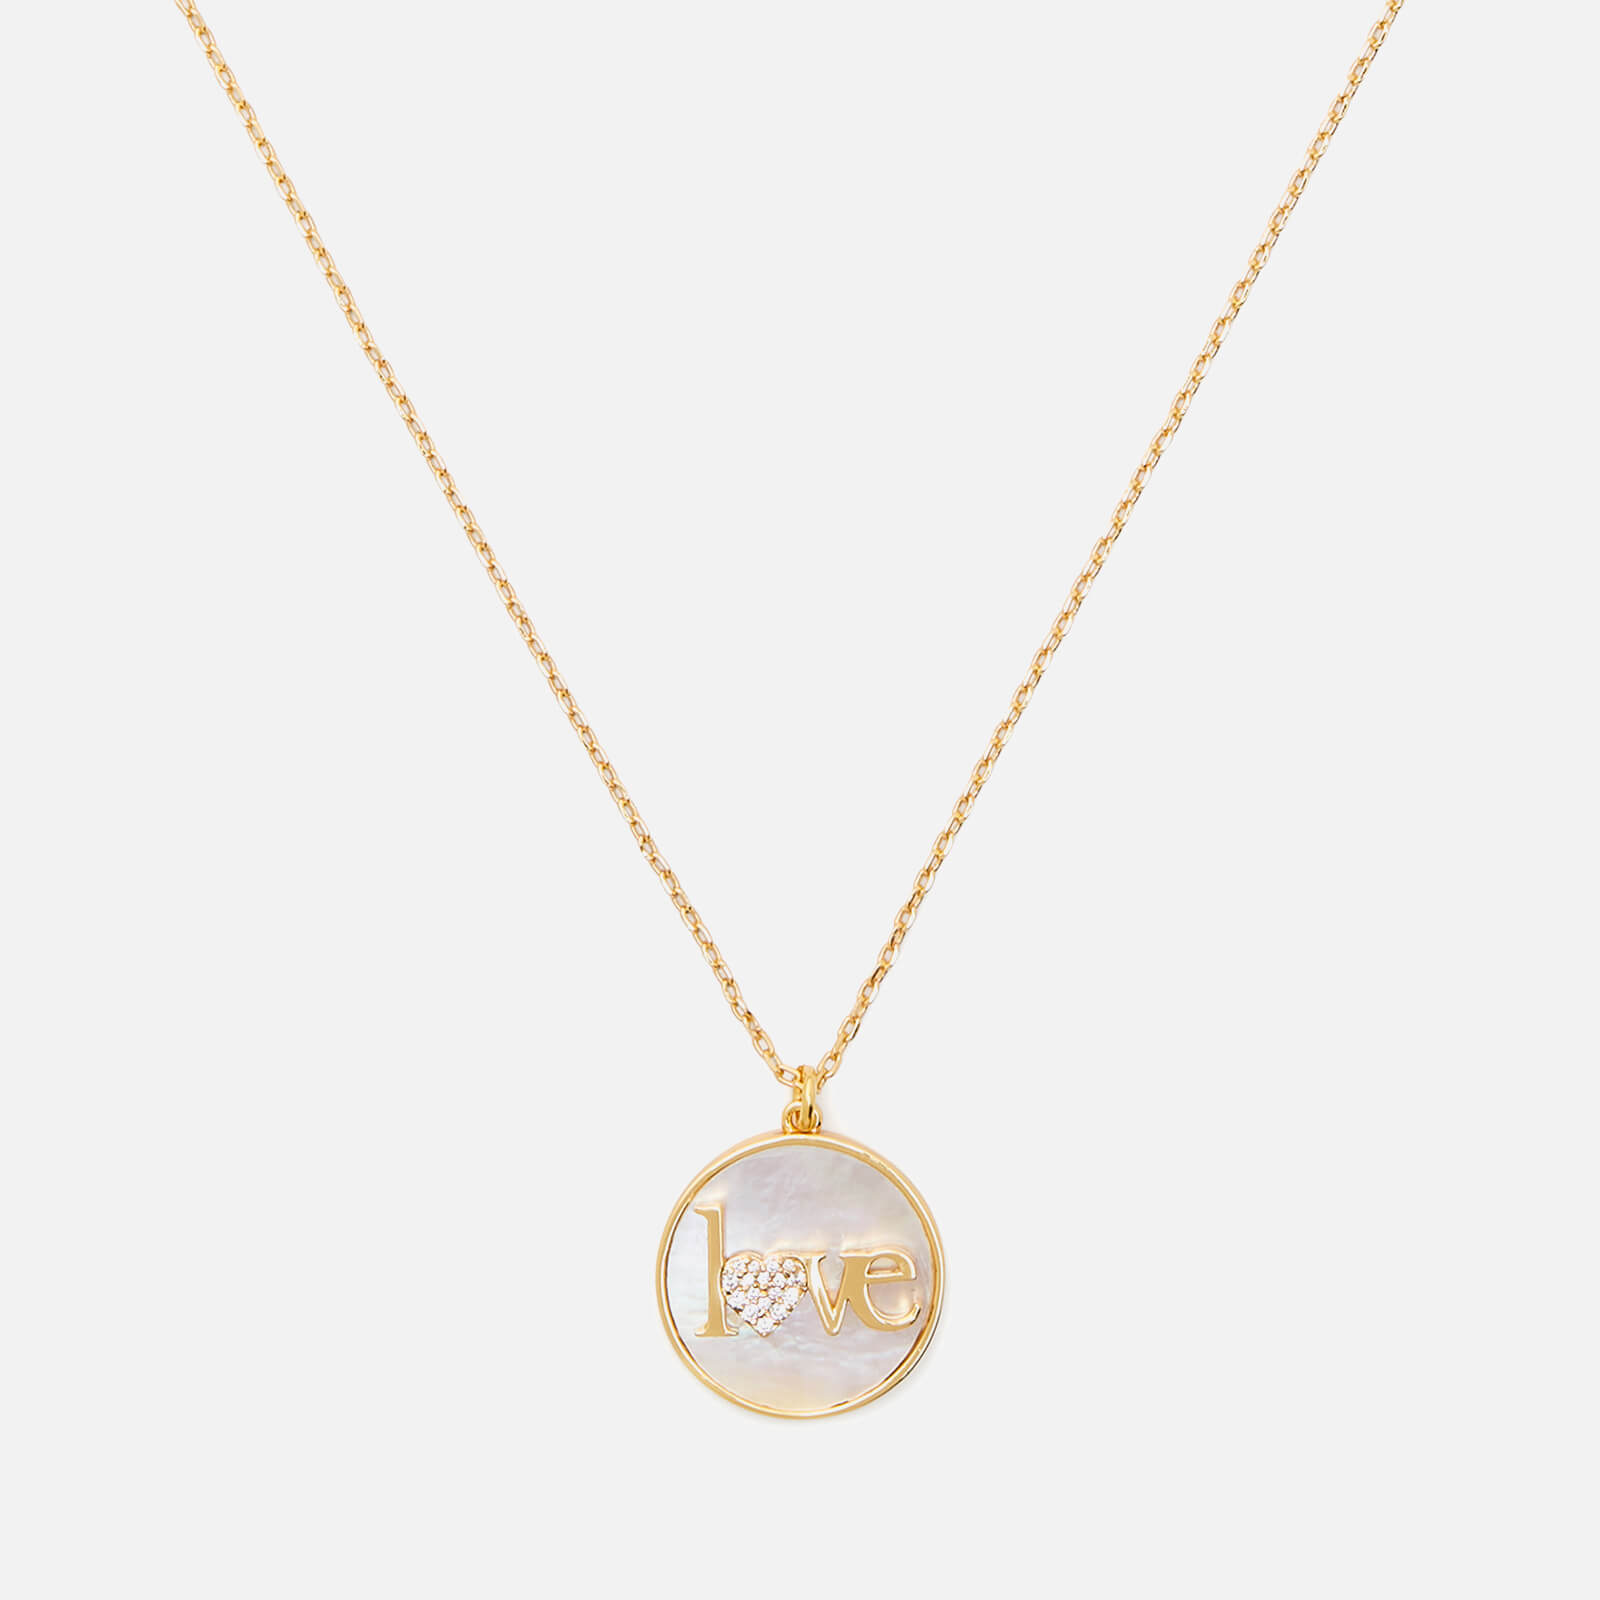 Kate Spade New York Mother Of Pearl Love Pendant